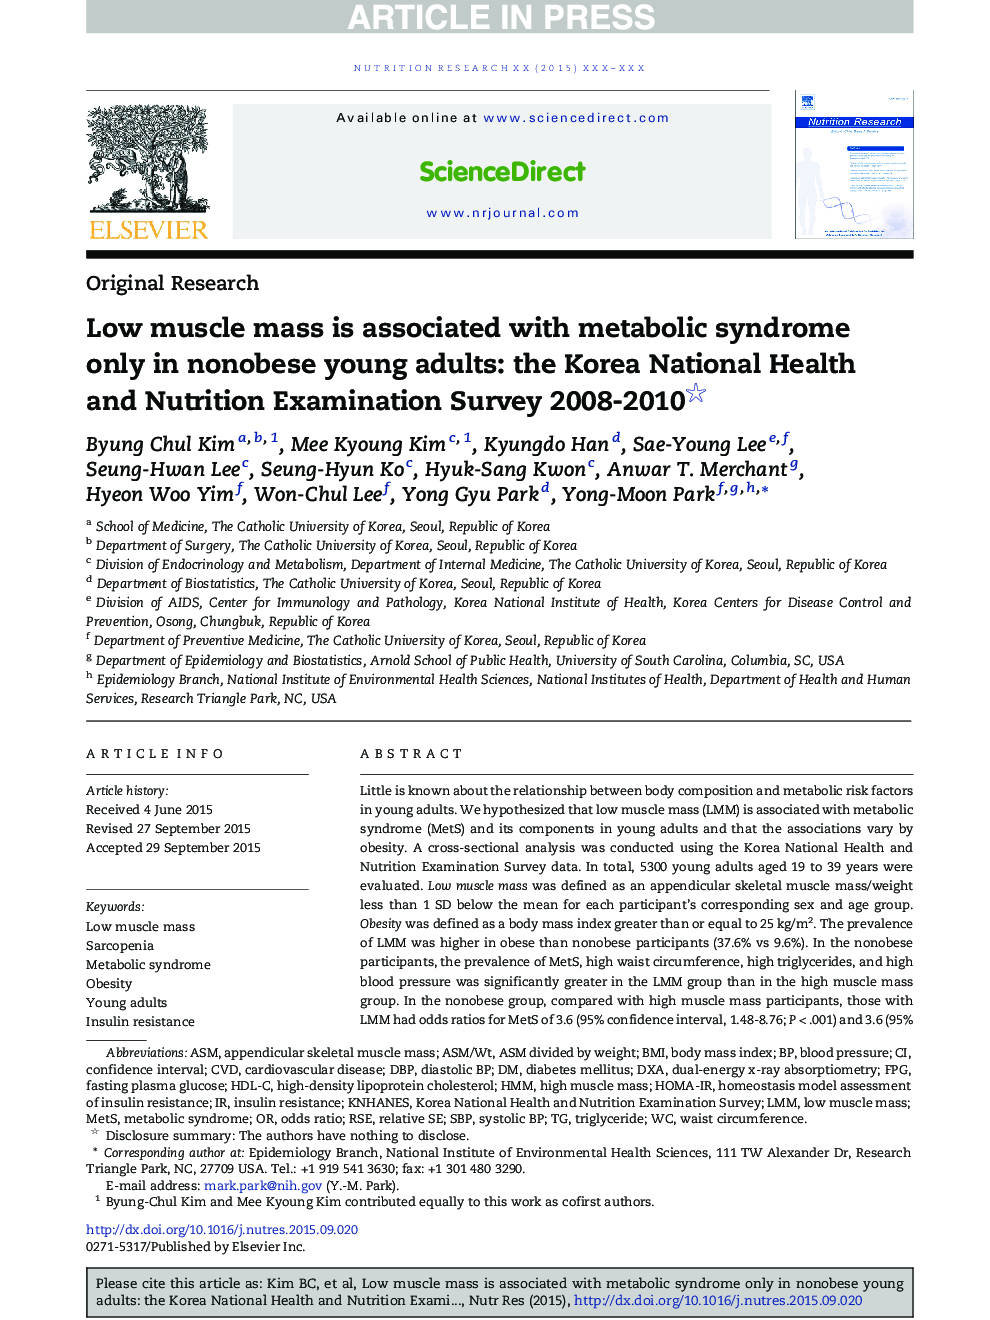 Low muscle mass is associated with metabolic syndrome only in nonobese young adults: the Korea National Health and Nutrition Examination Survey 2008-2010